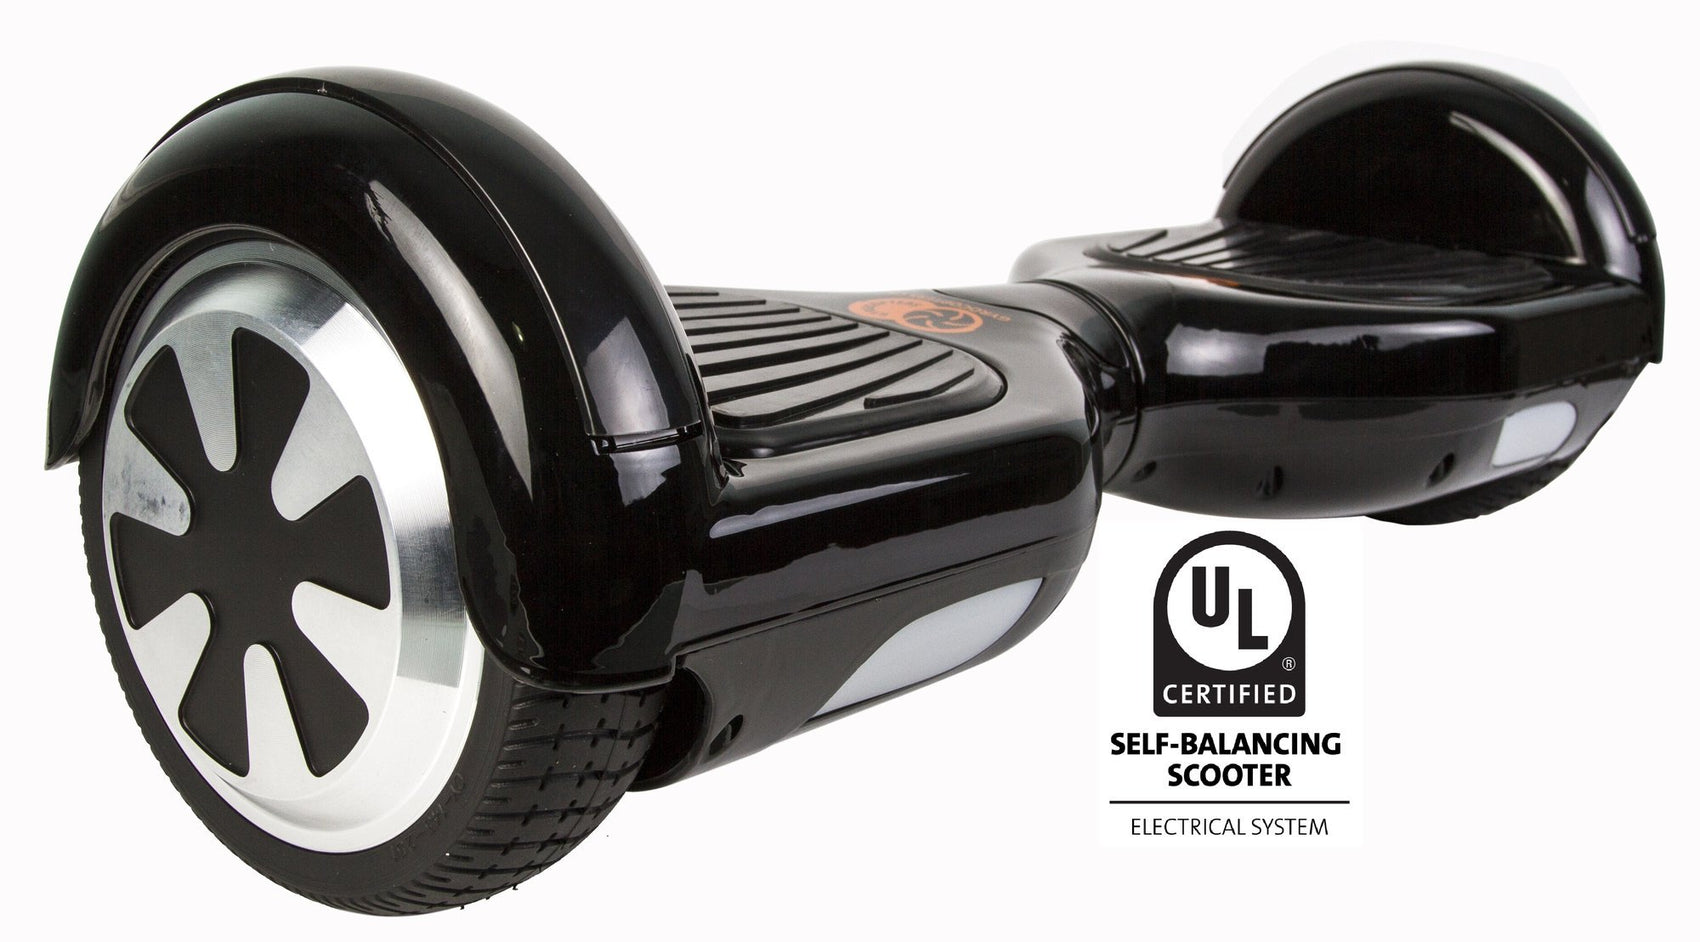 Buy Your Own Self Balancing Hoverboard from Leading Online Store